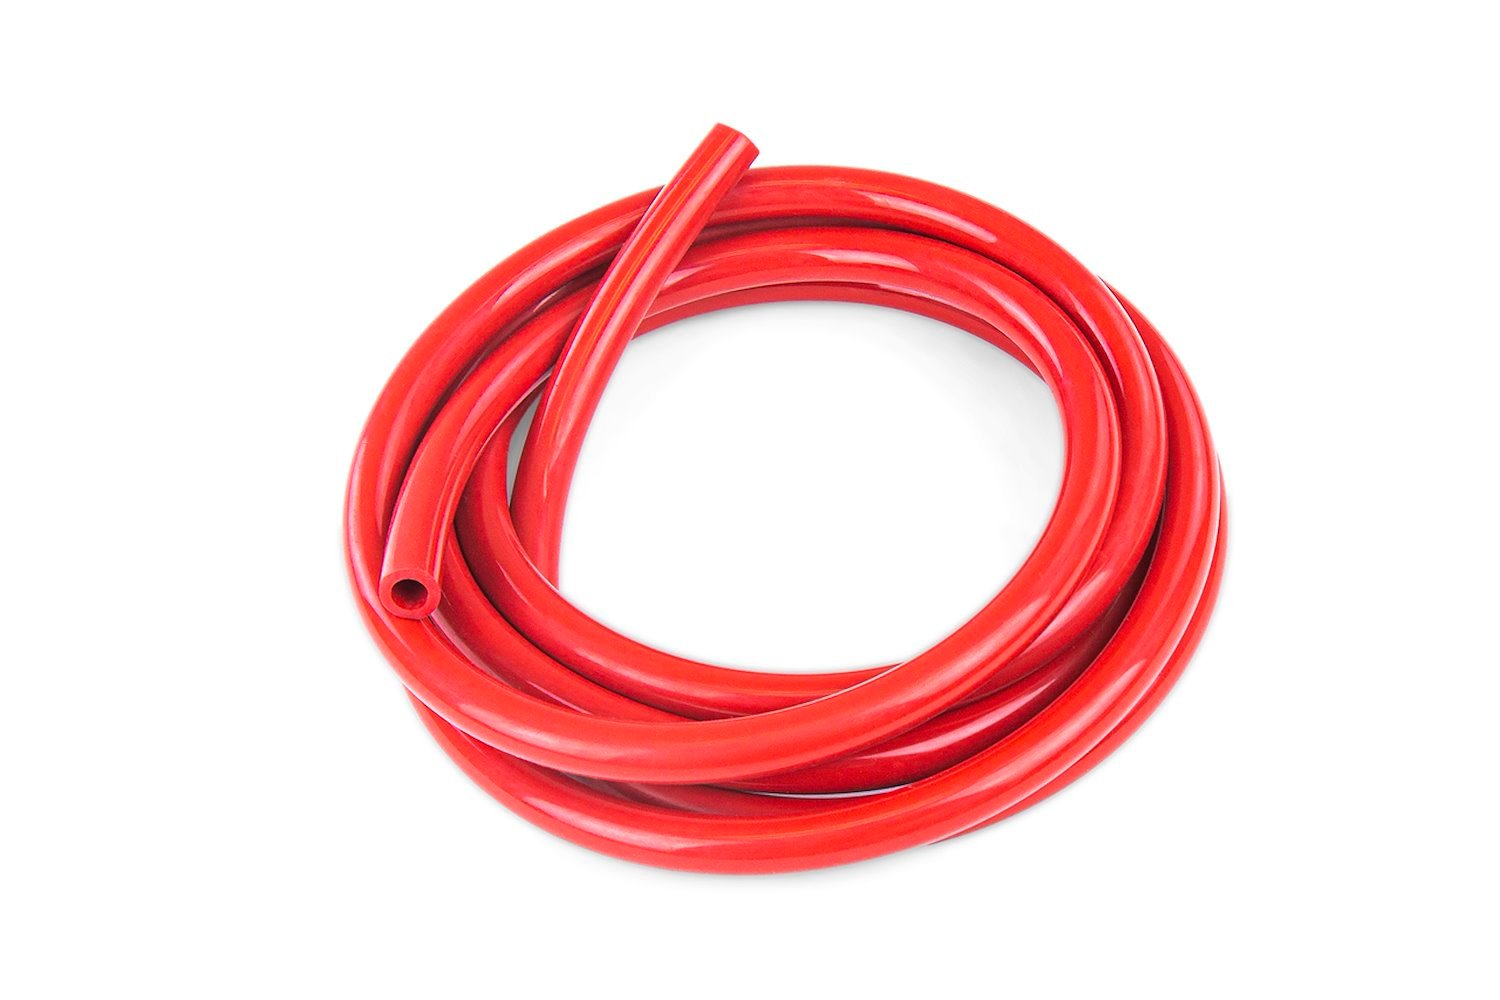 HTSVH6-REDx5 High-Temperature Silicone Vacuum Hose Tubing, 1/4 in. ID, 5 ft. Roll, Red